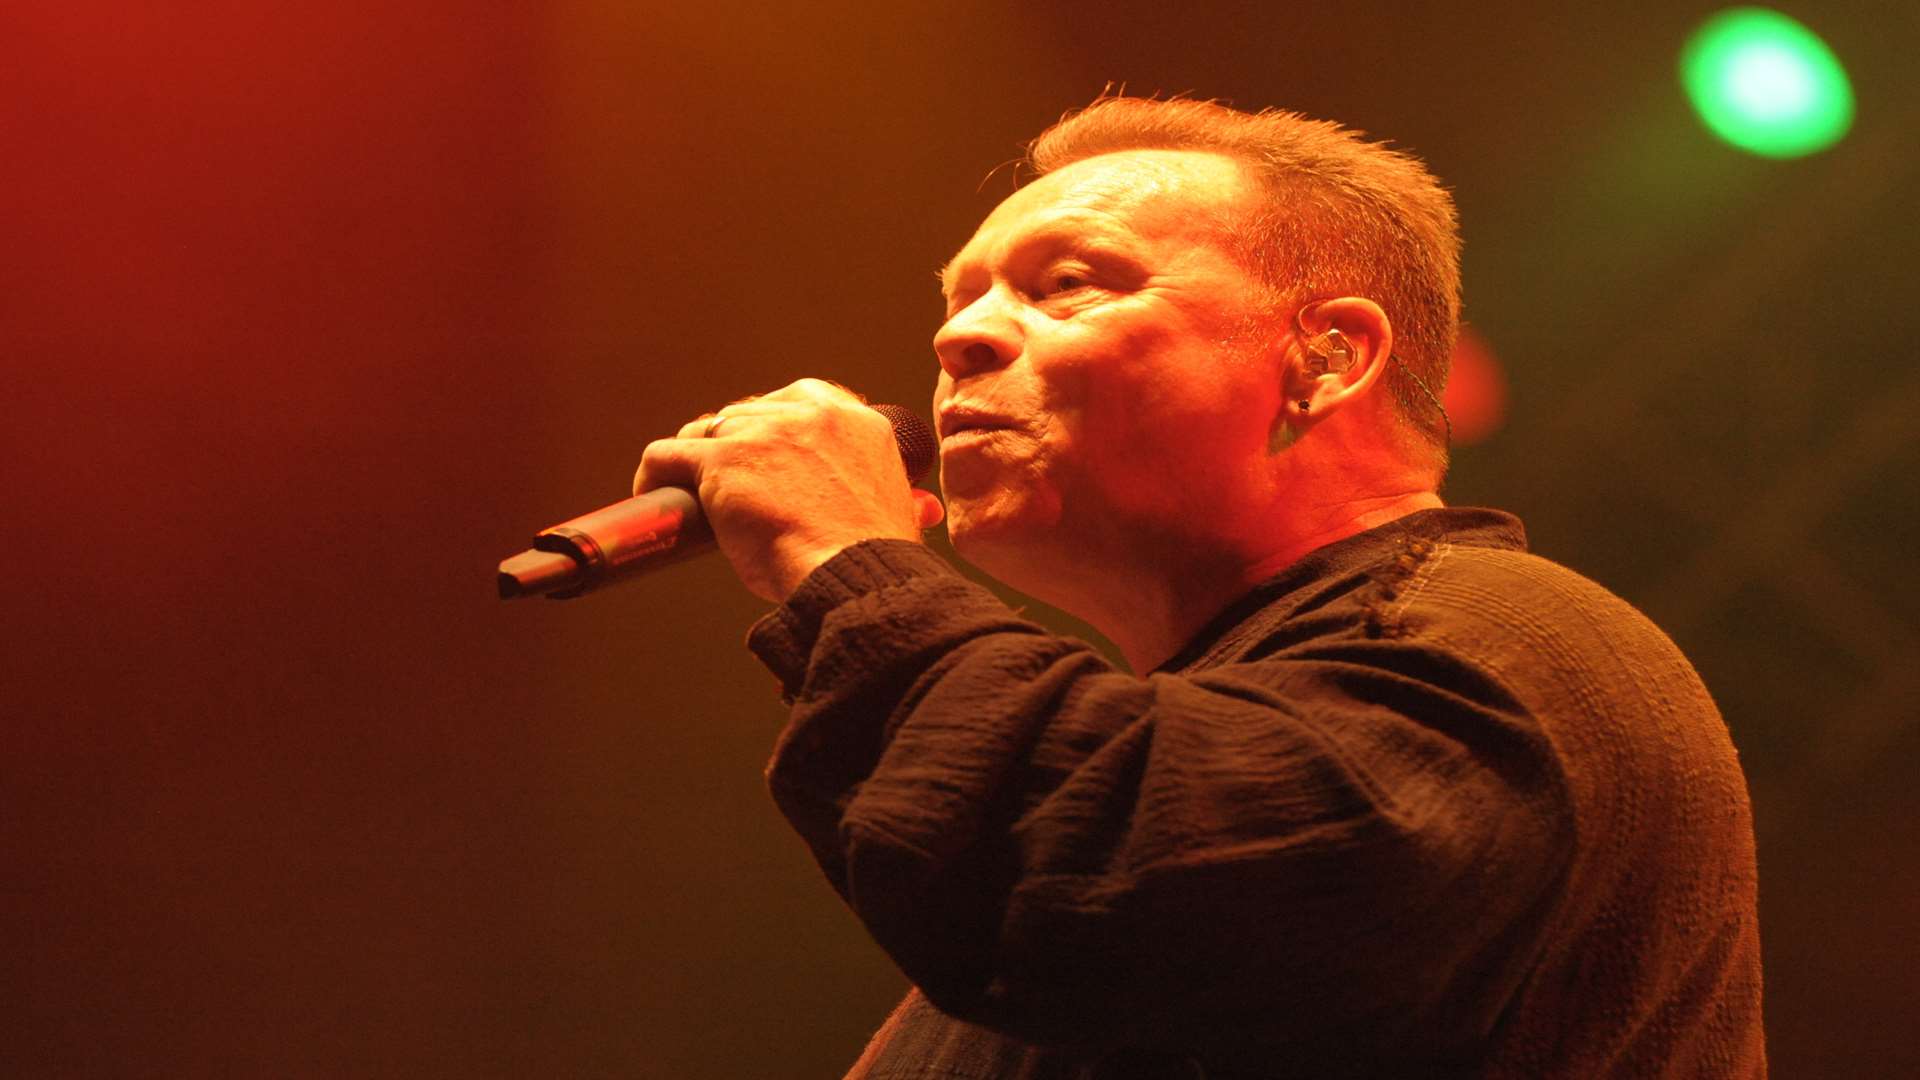 11 Why did this UB40 gig at Castle Concerts in Rochester leave some fans feeling damp and disappointed?